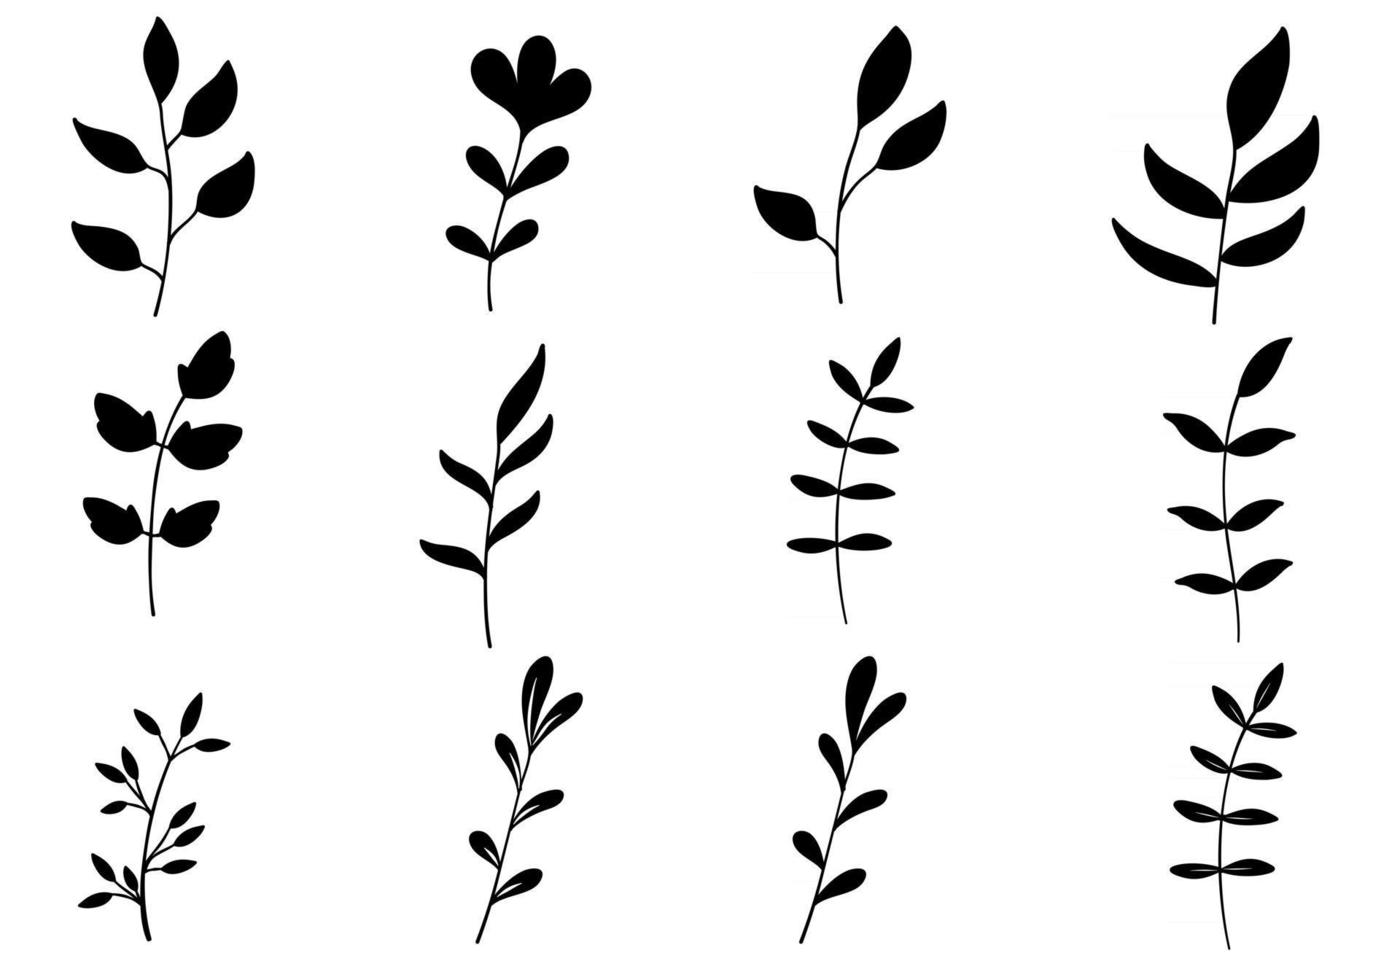 Minimalist Flowers and Branches vector